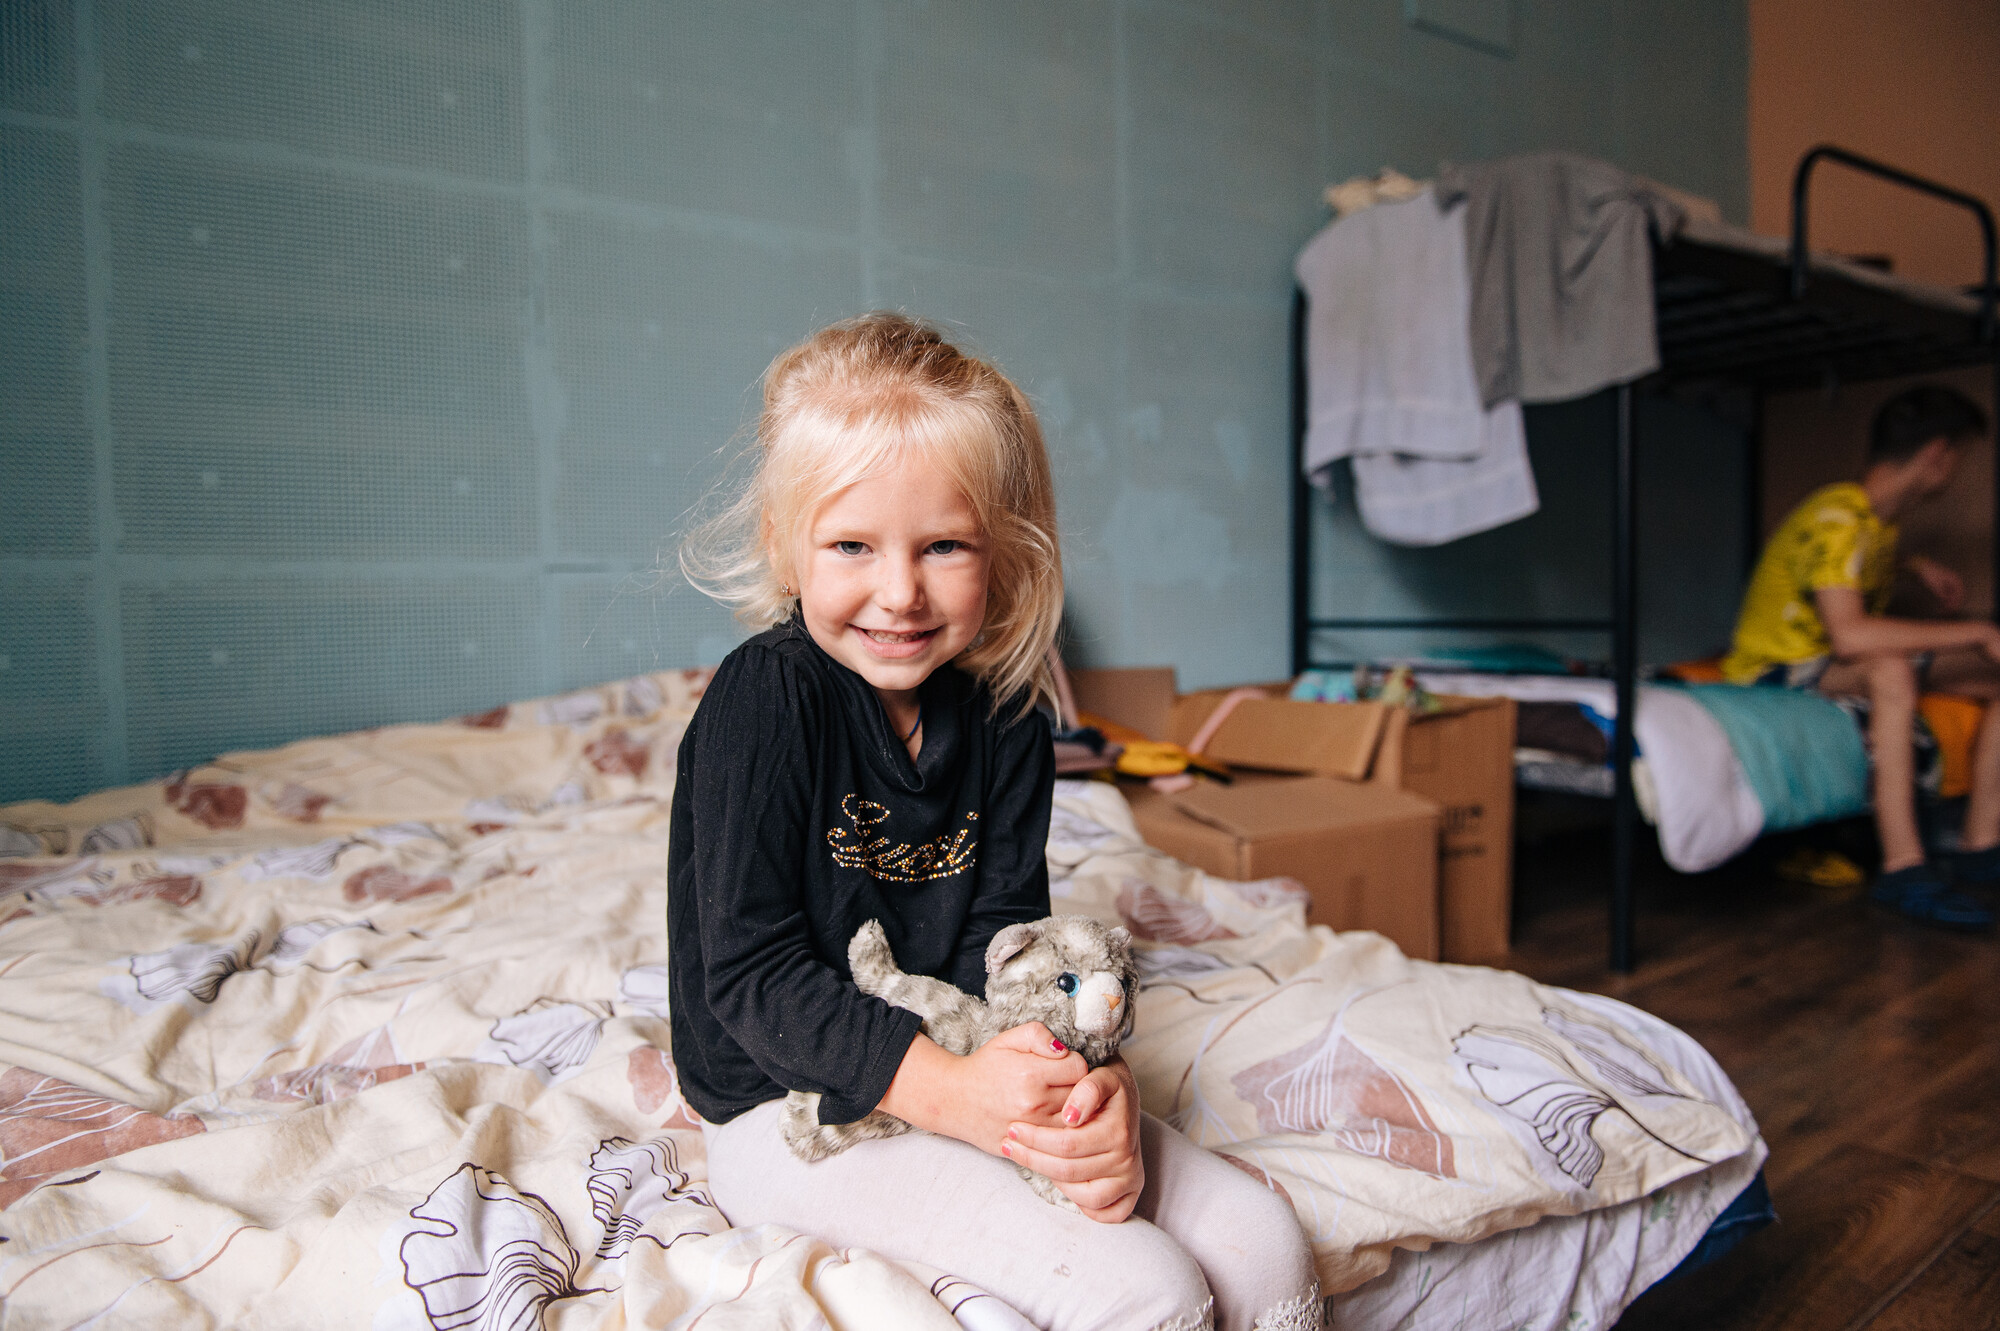 A young girl, Kristina, sits in a bad and holds a stuffed animal she brought with her when she fled her home in Ukraine.